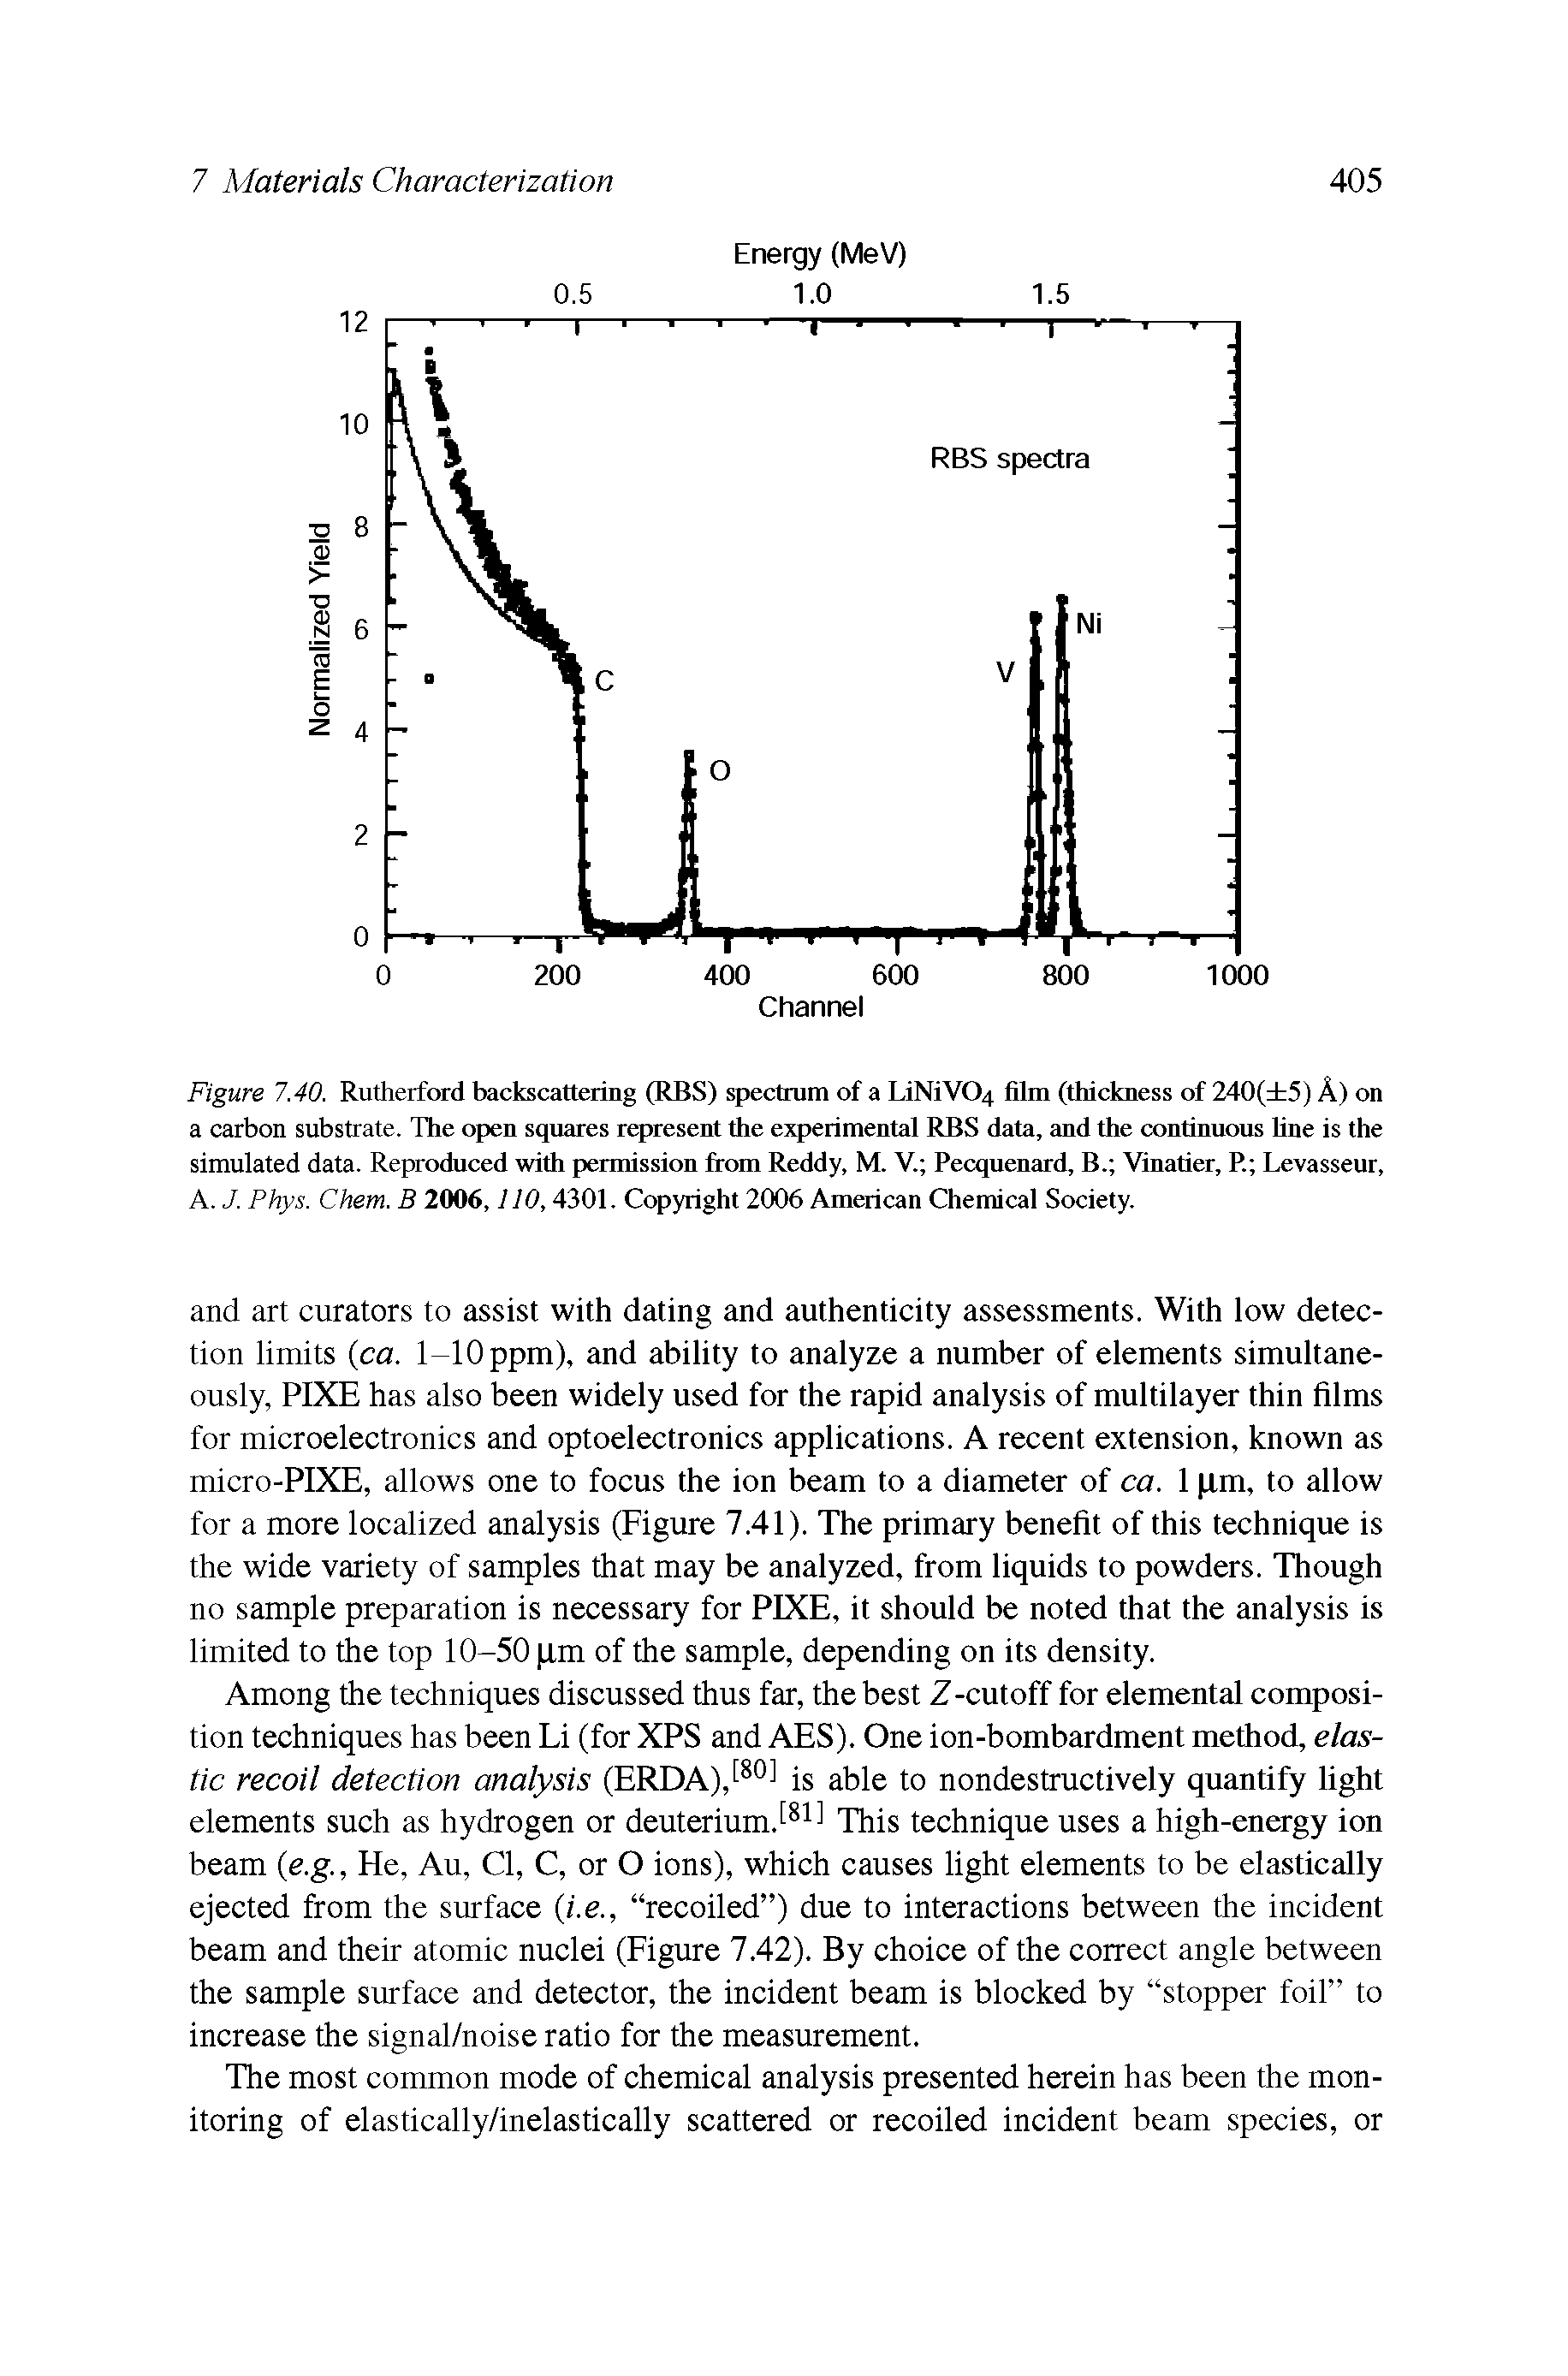 Figure 7.40. Rutherford backscattering (RBS) spectrum of a LiNiV04 film (thickness of 240( 5) A) on a carbon substrate. The open squares represent the experimental RBS data, and the continuous fine is the simulated data. Reproduced with permission from Reddy, M. V. Pecquenard, B. Vinatier, R Levasseur, A. J. Phys. Chem. B 2006,110,4301. Copyright 2006 American Chemical Society.